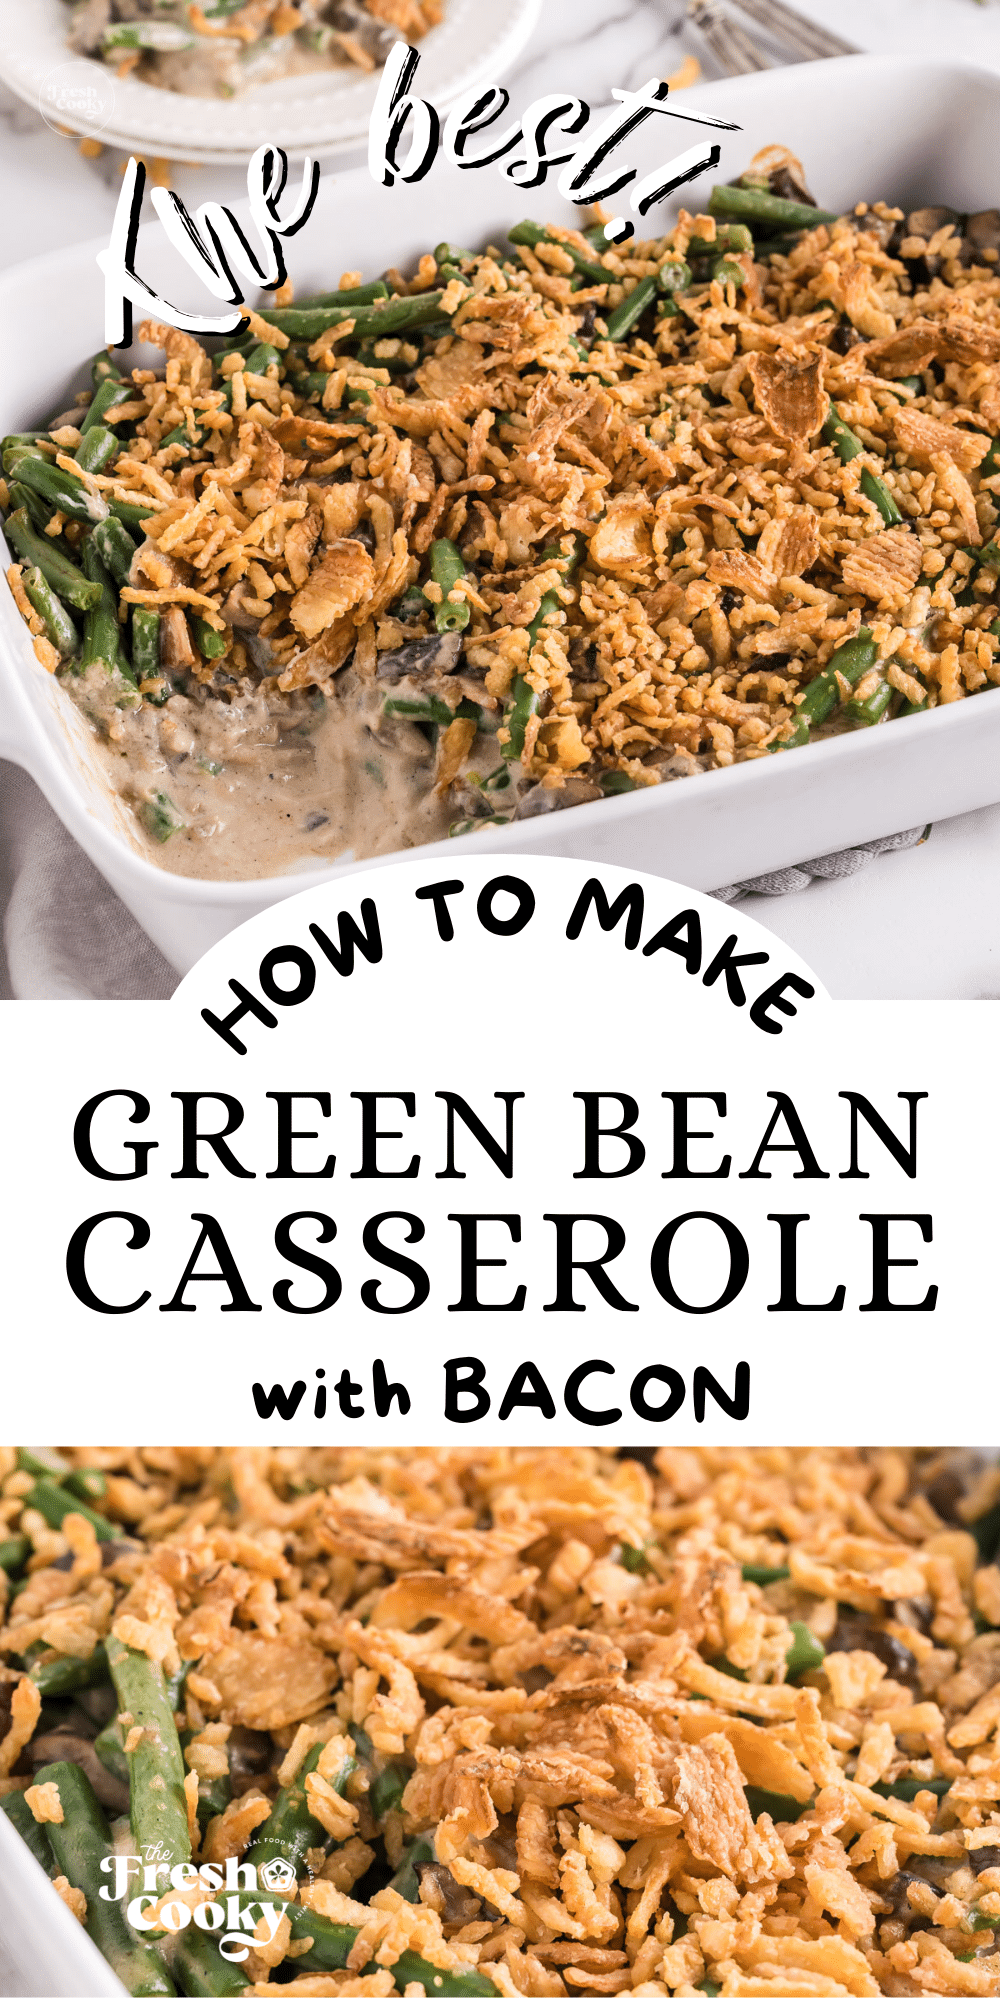 Classic Green Bean Casserole Recipe with Bacon • The Fresh Cooky